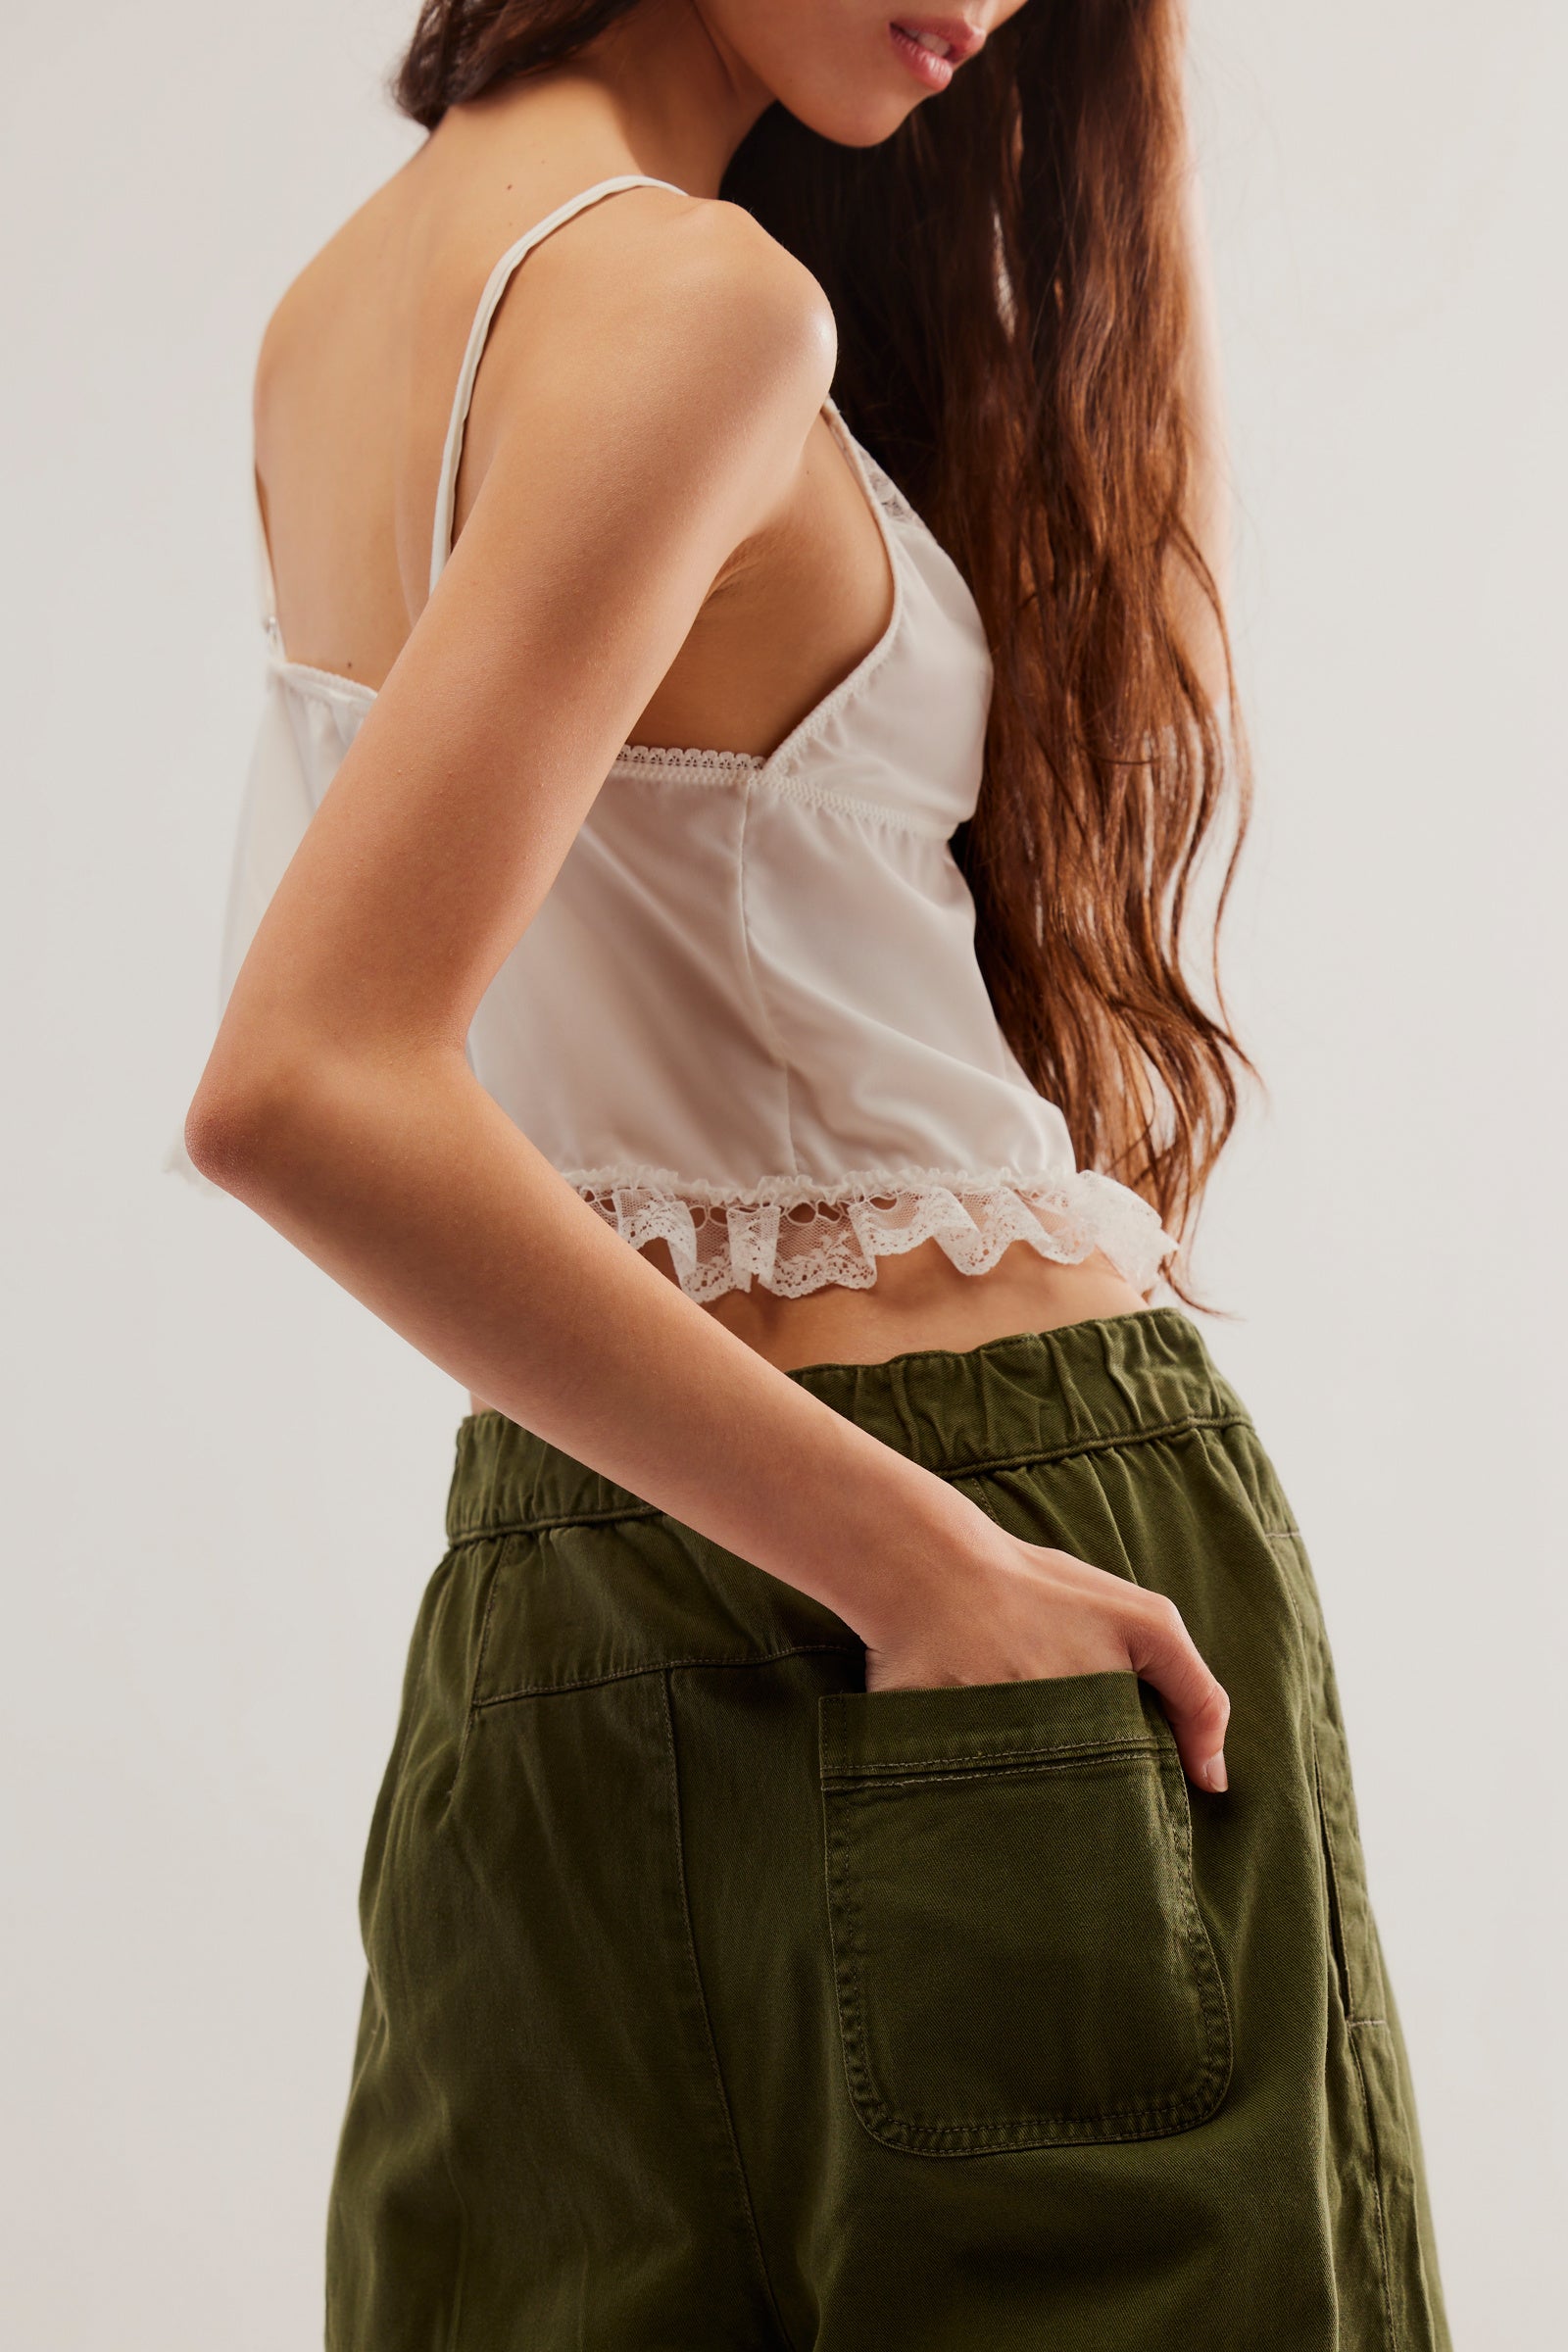 Free People After Love Cuffed Pant